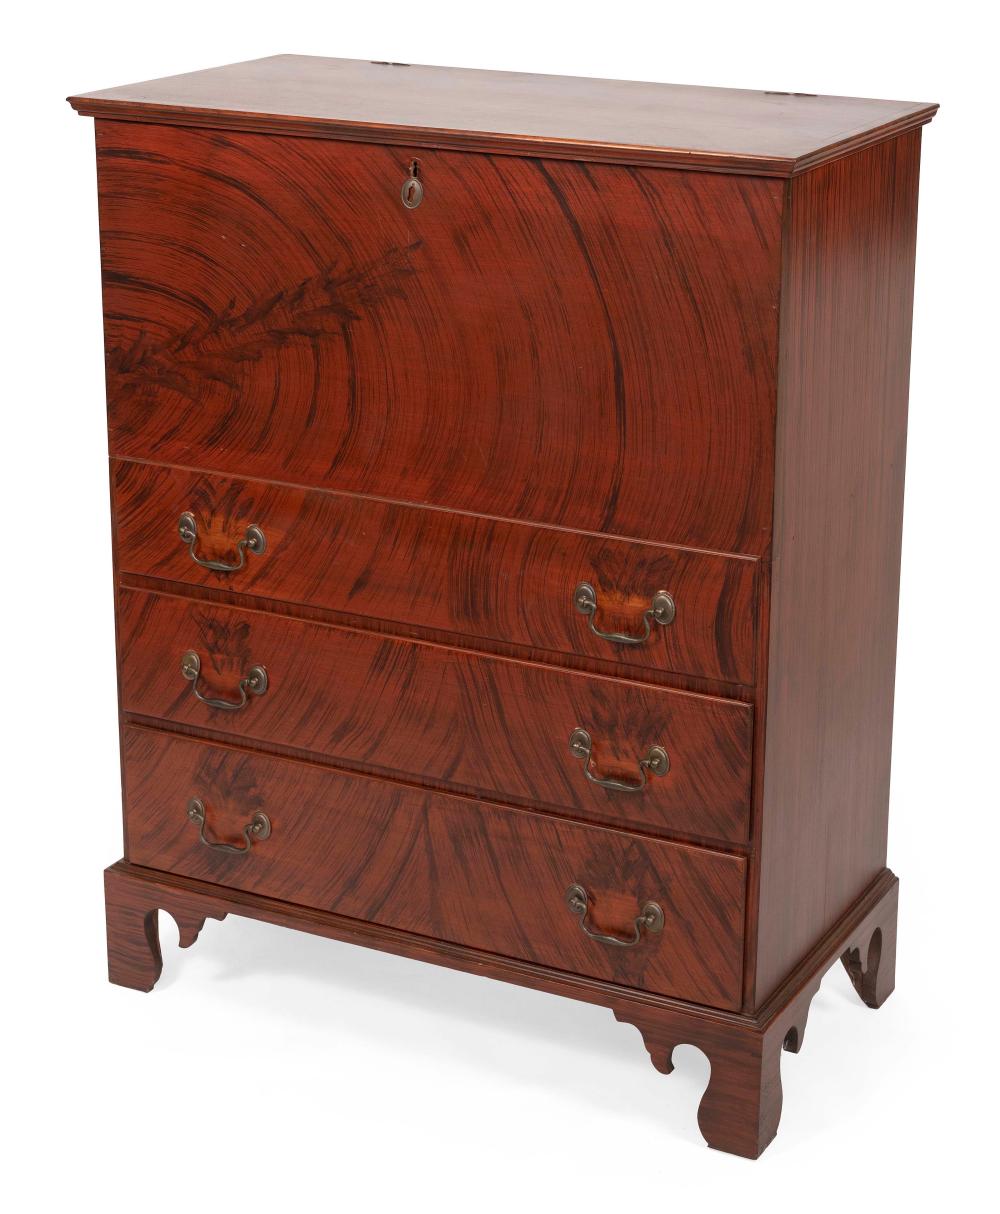 CHIPPENDALE STYLE BLANKET CHEST 3506d0